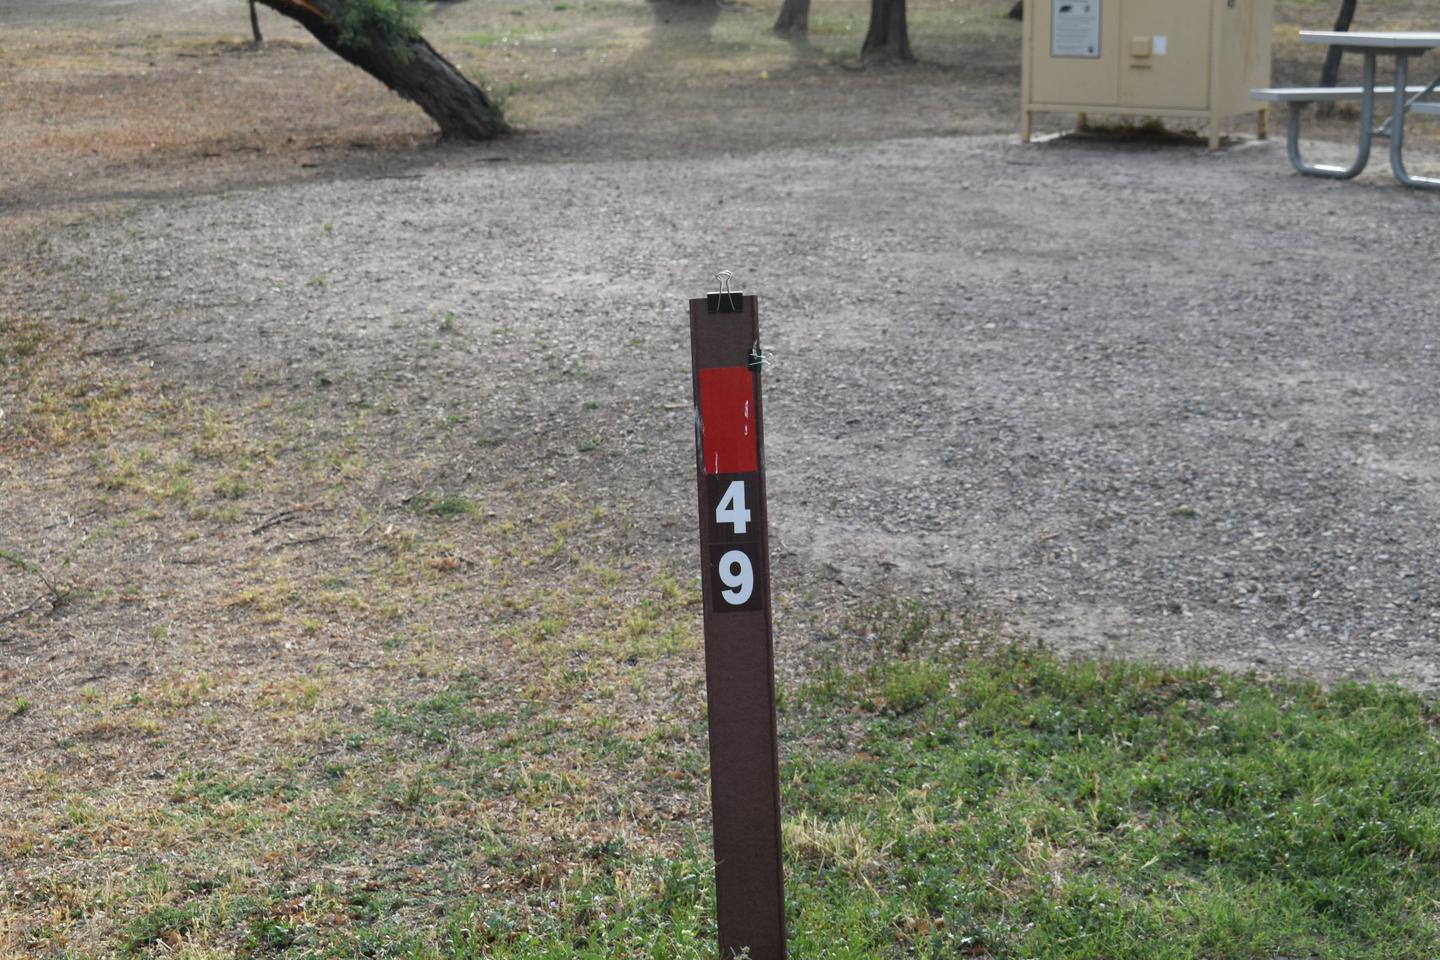 Brown site maker with red sticker for Site 49Site marker for Site 49